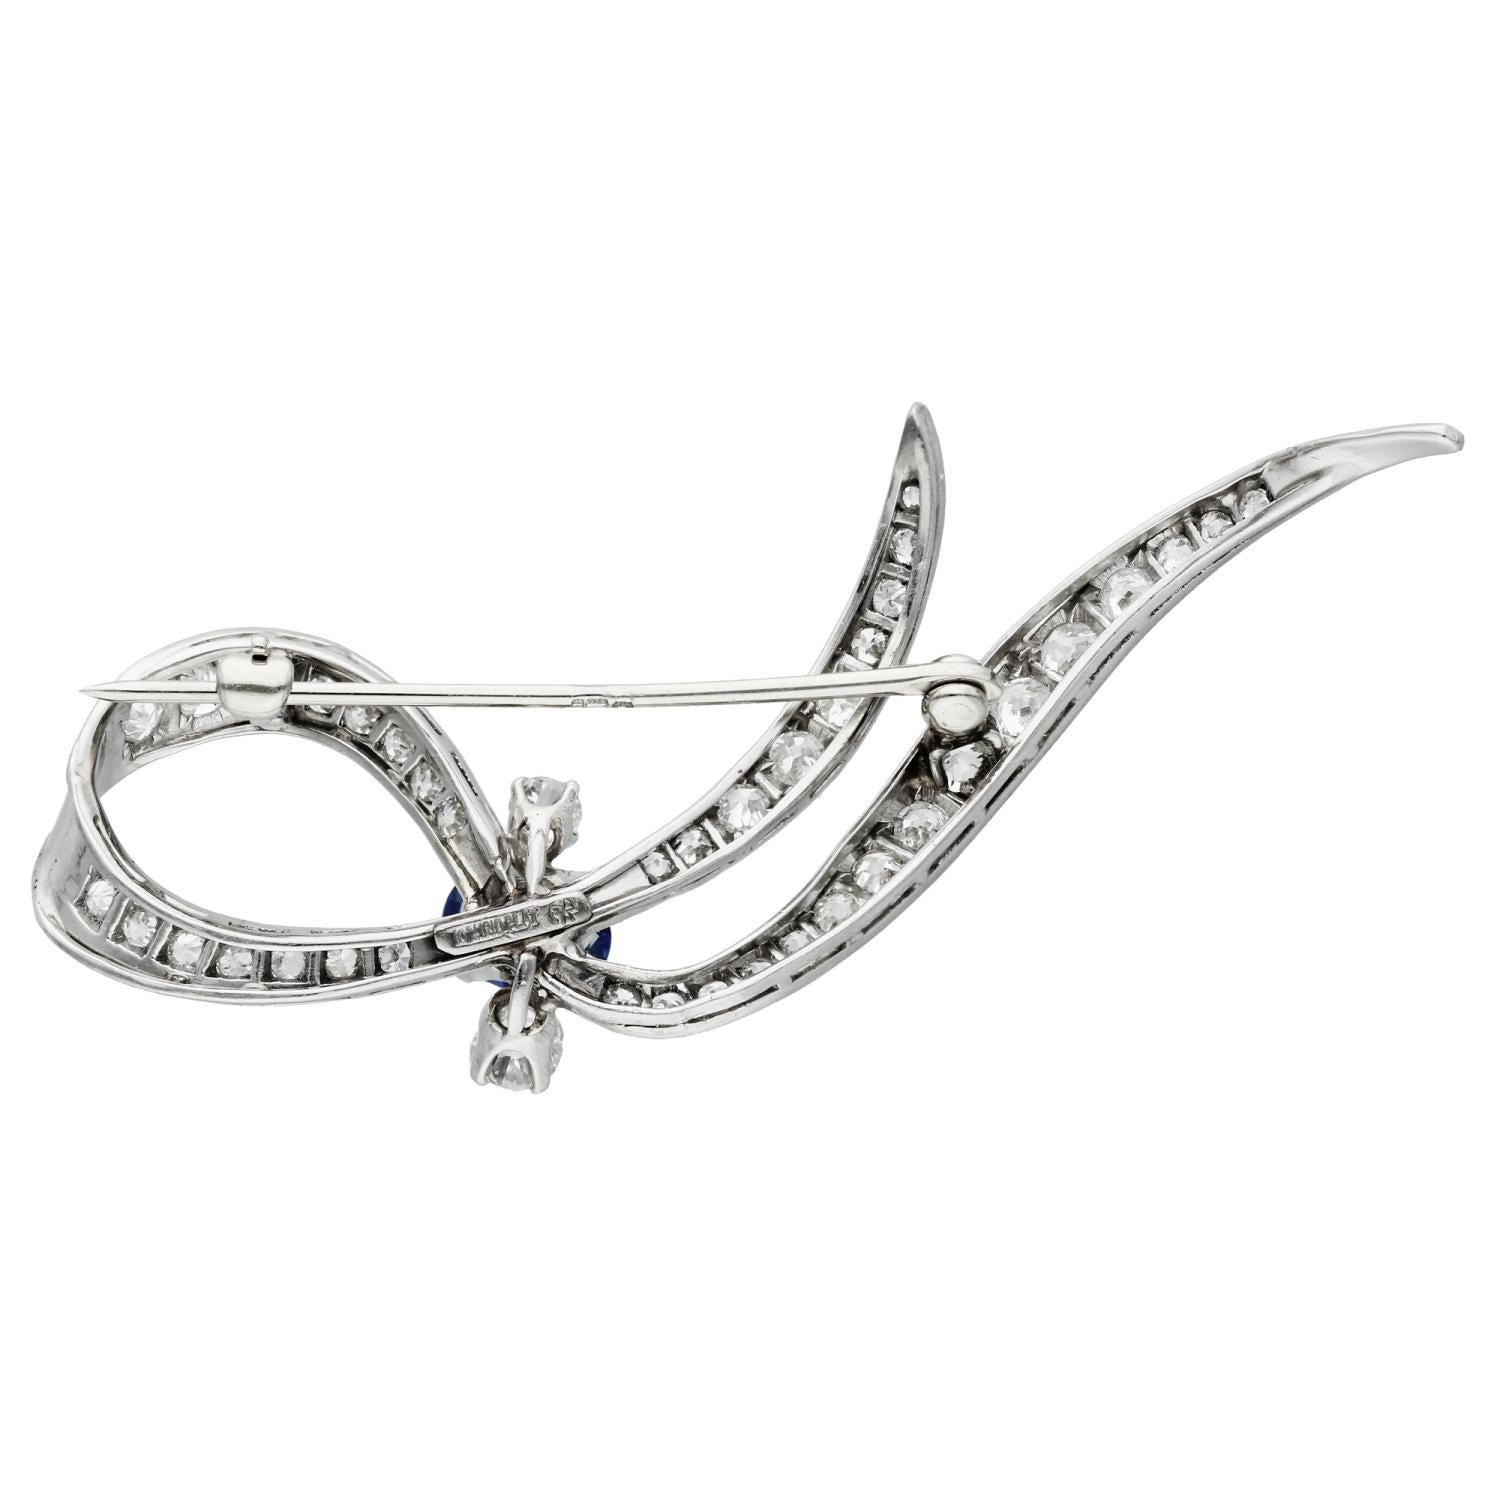 14ct White Gold 0.60ct Sapphire & 1.45ct Diamond Brooch

Elevate your elegance with our Pre-Loved 14ct White Gold Sapphire & Diamond Brooch, a timeless piece of sophistication and style. This exquisite brooch boasts a ribbon design, featuring